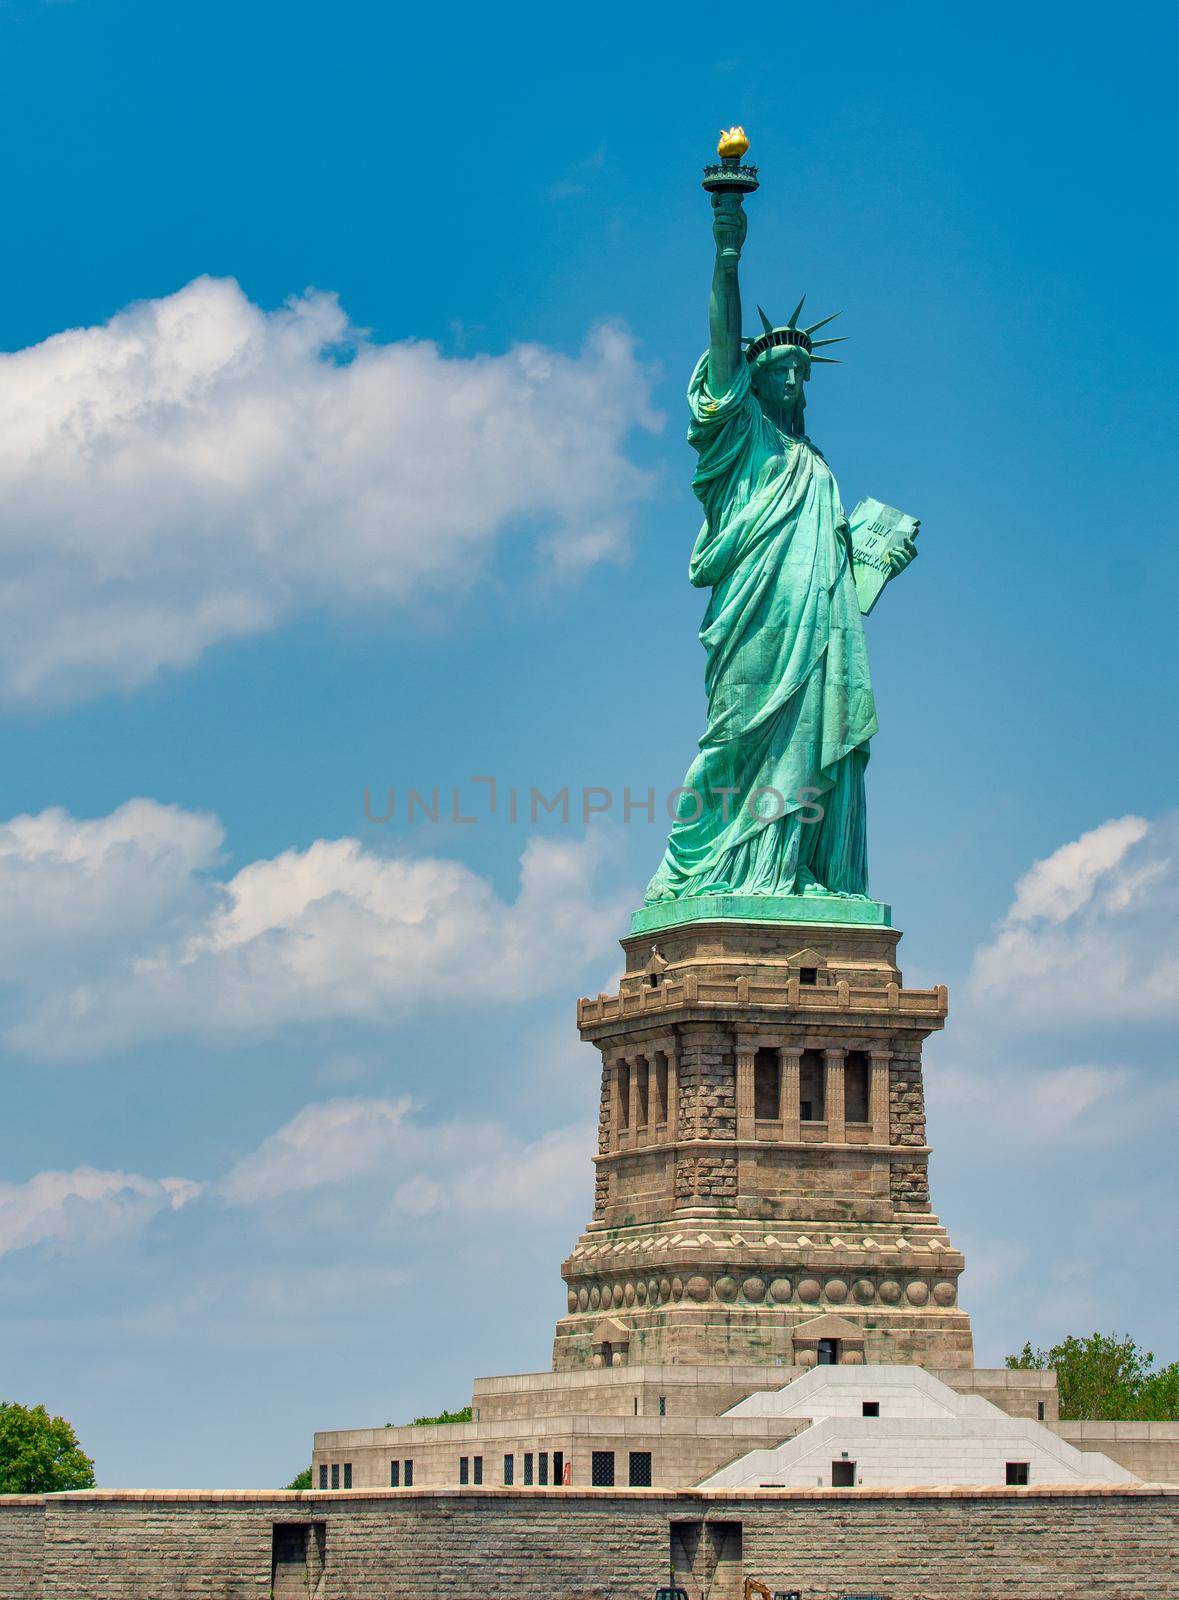 Amazing view of Statue of Liberty from the ferry boat, New York City